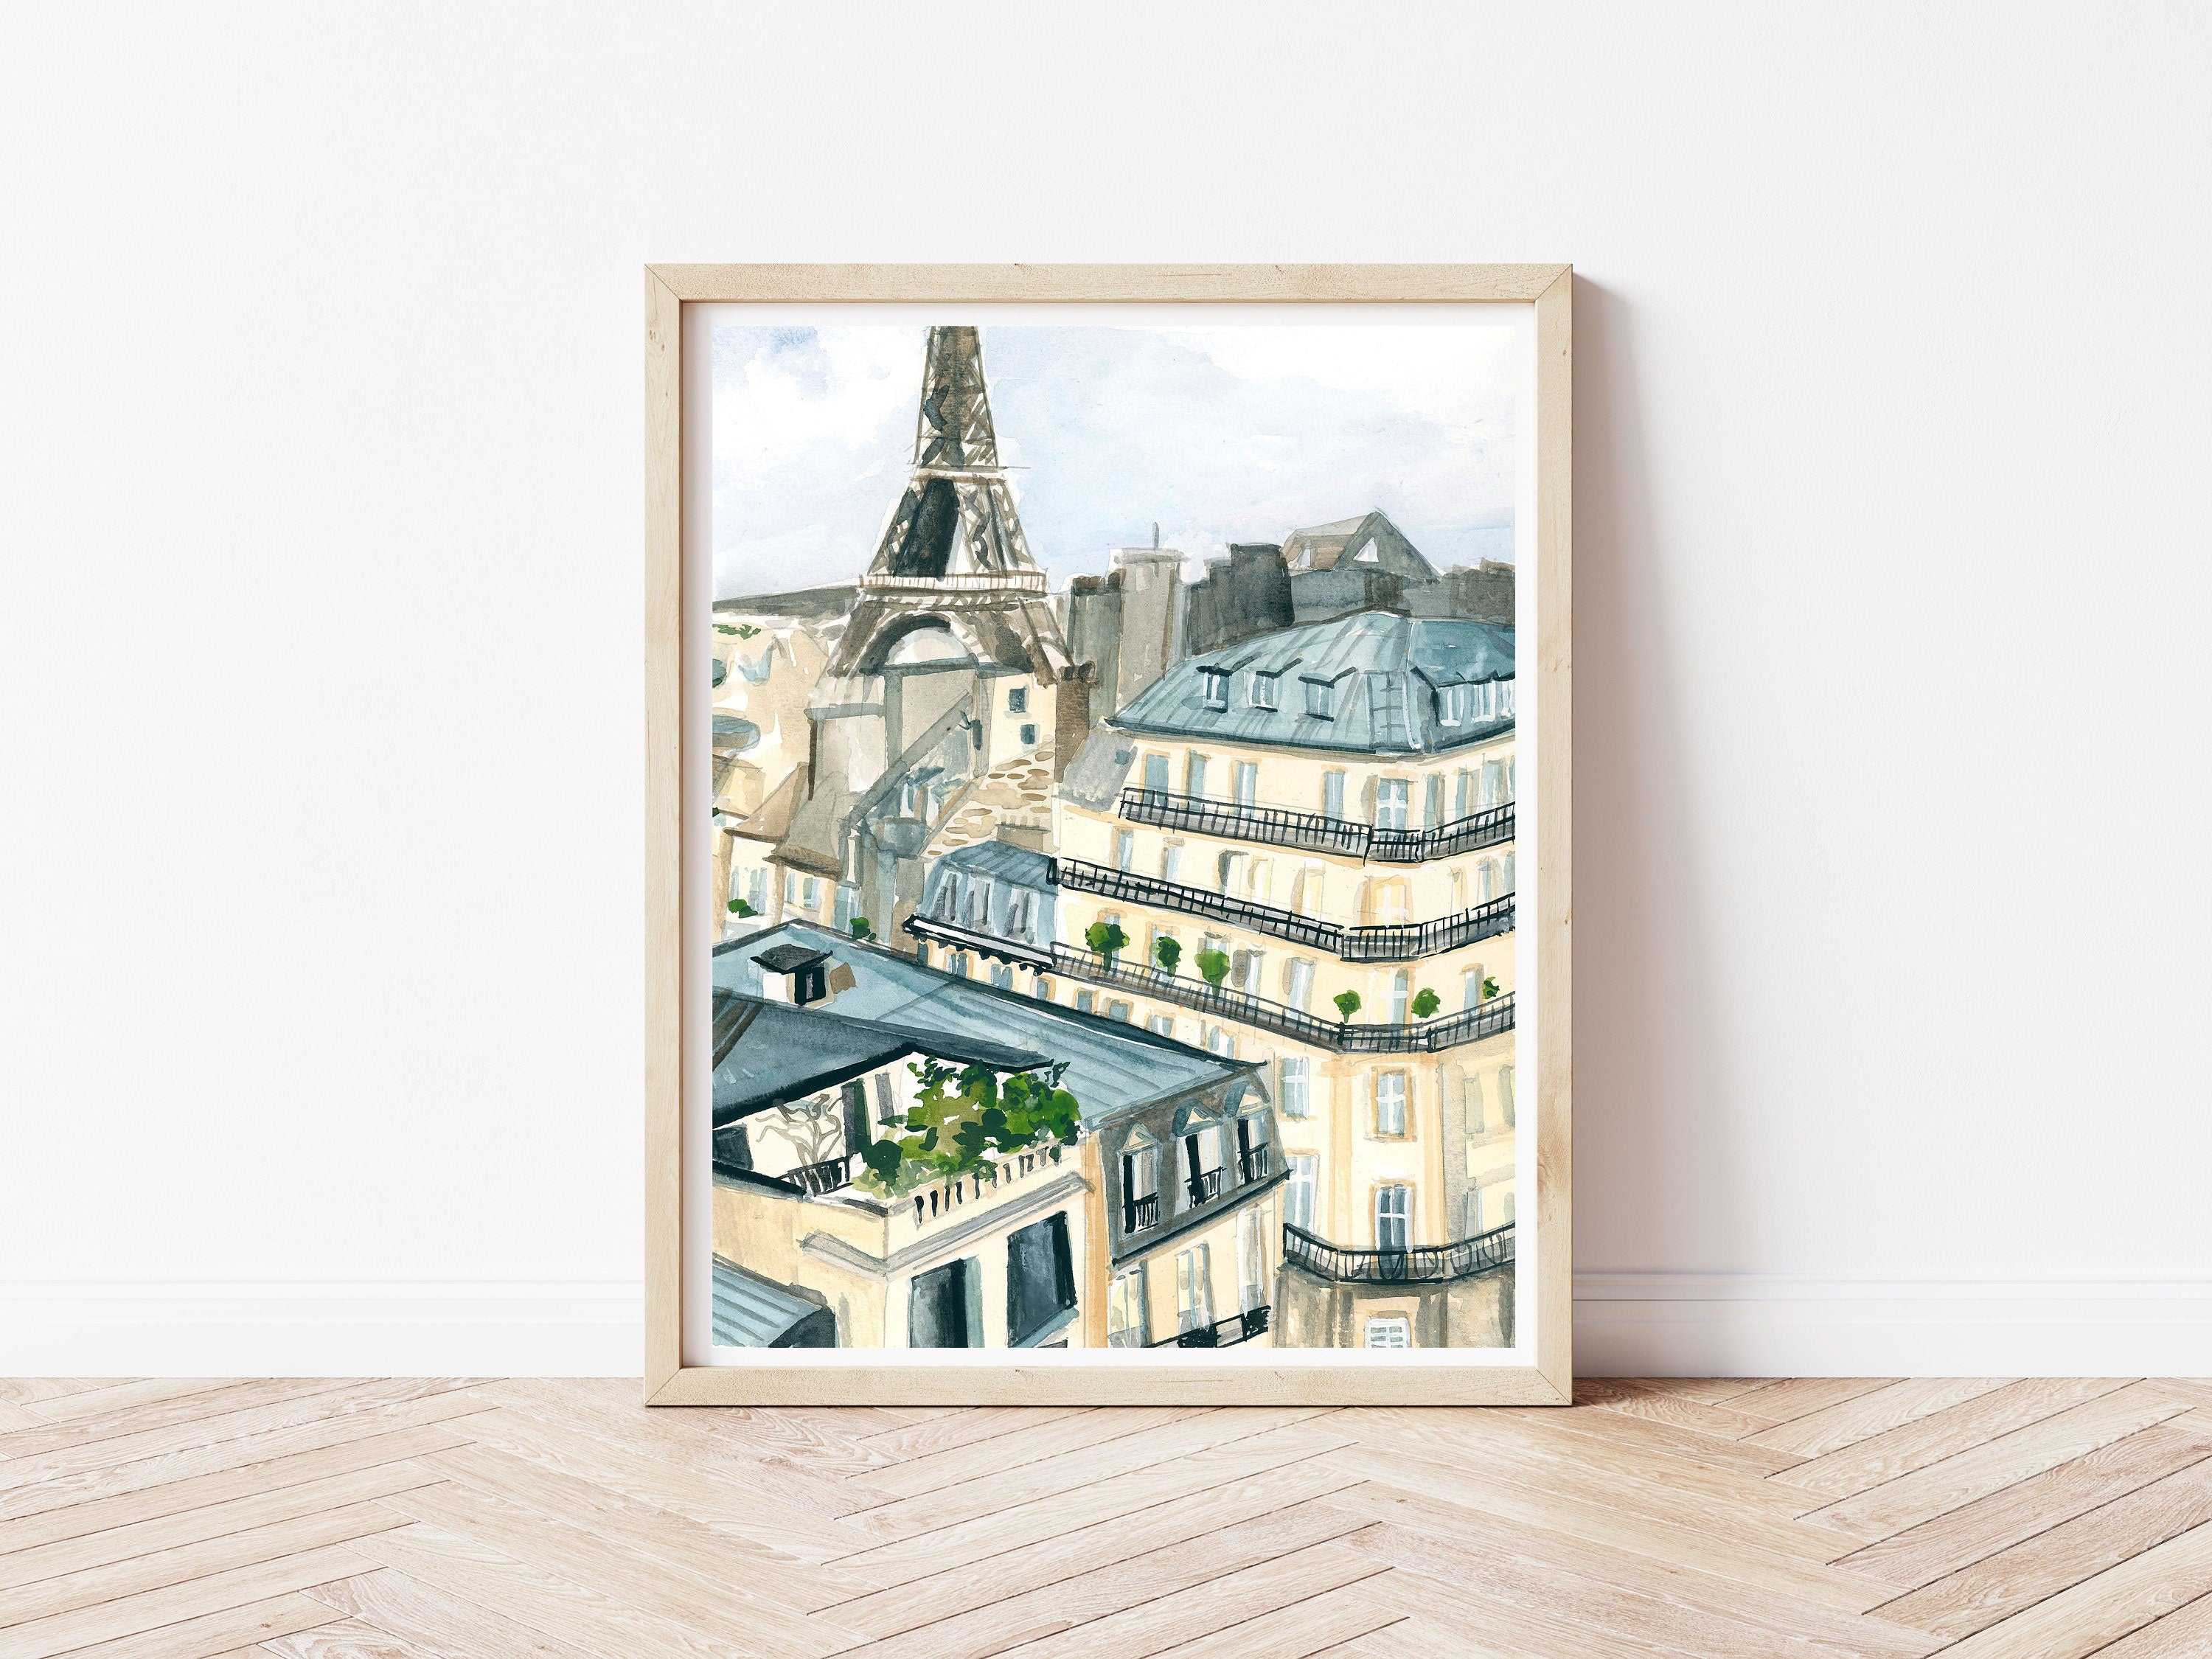 Parisian buildings and Eiffel tower print of painting by Medjool Studio. Print of original gouache painting based on the artist's own travels to Europe detailing historic architecture and the Eiffel tower.